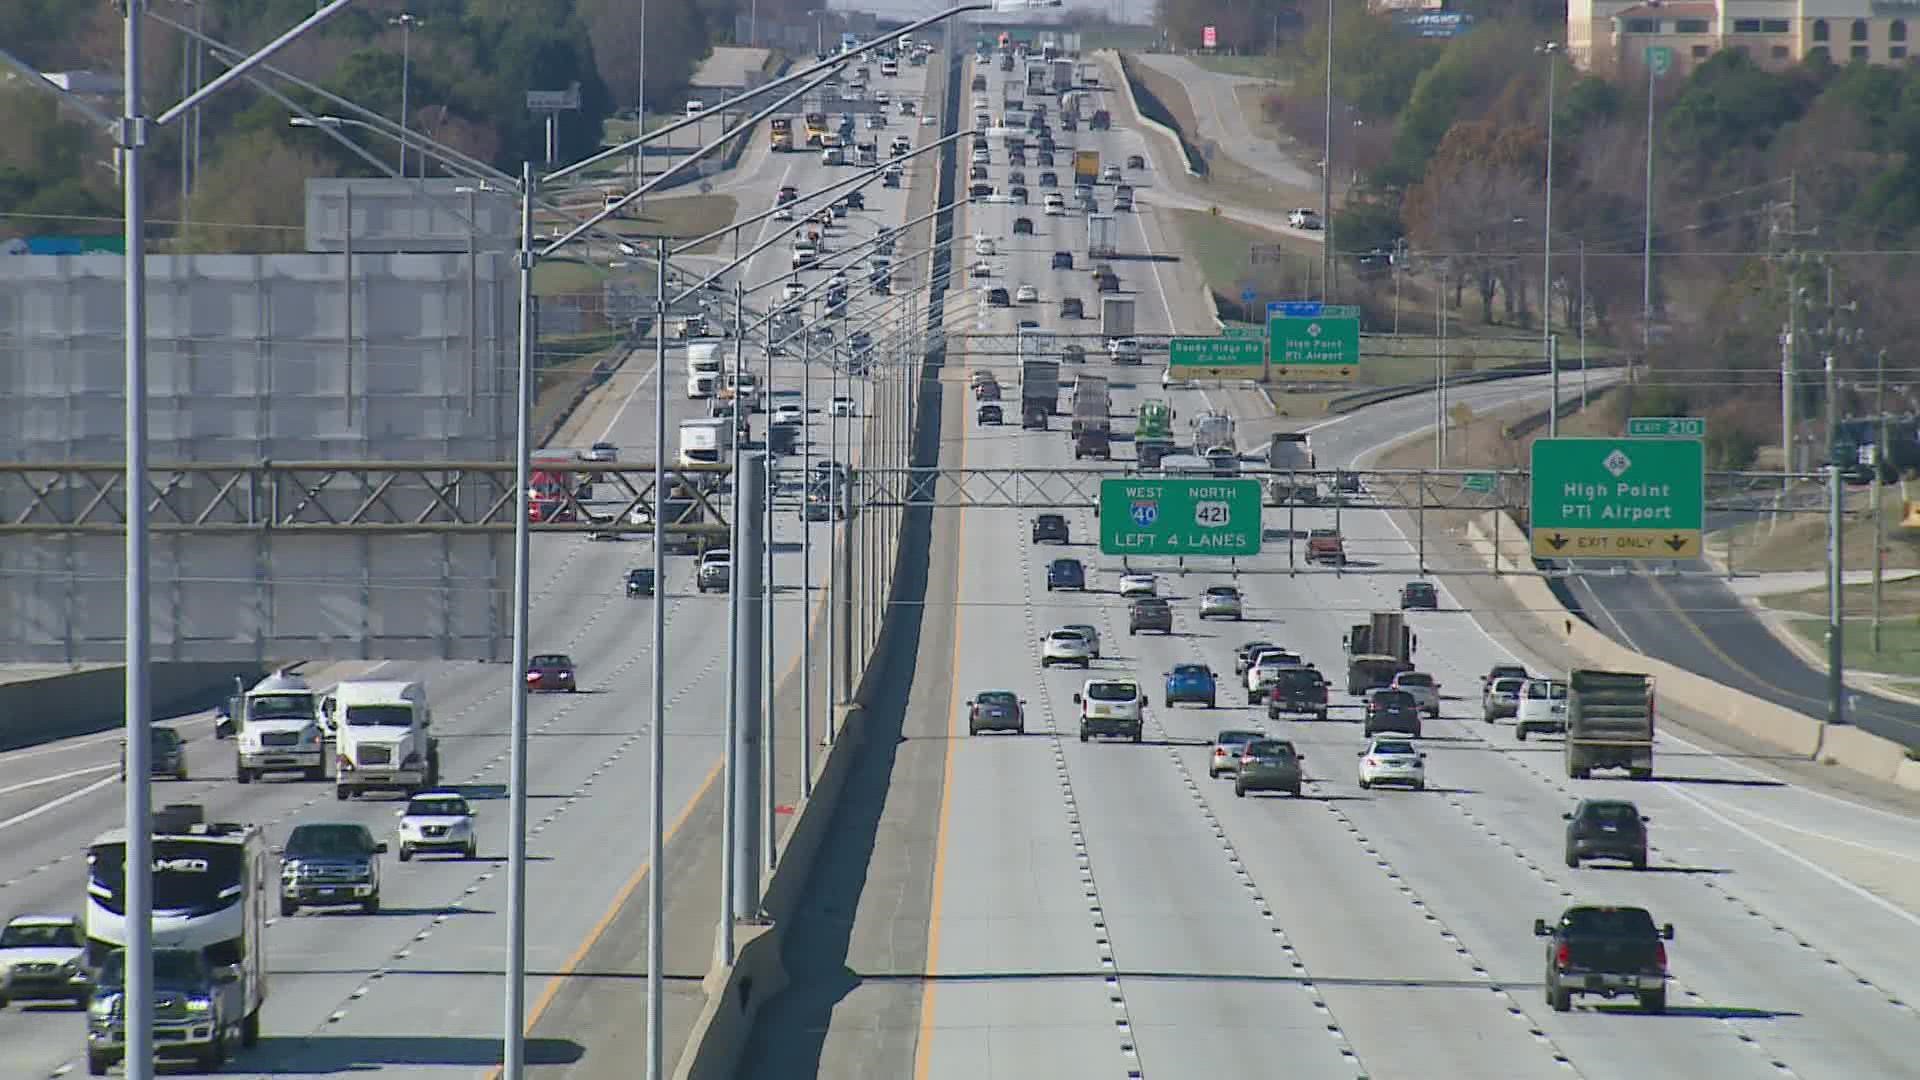 AAA reported they expect the 2022 Thanksgiving travel season to be among the busiest in years.